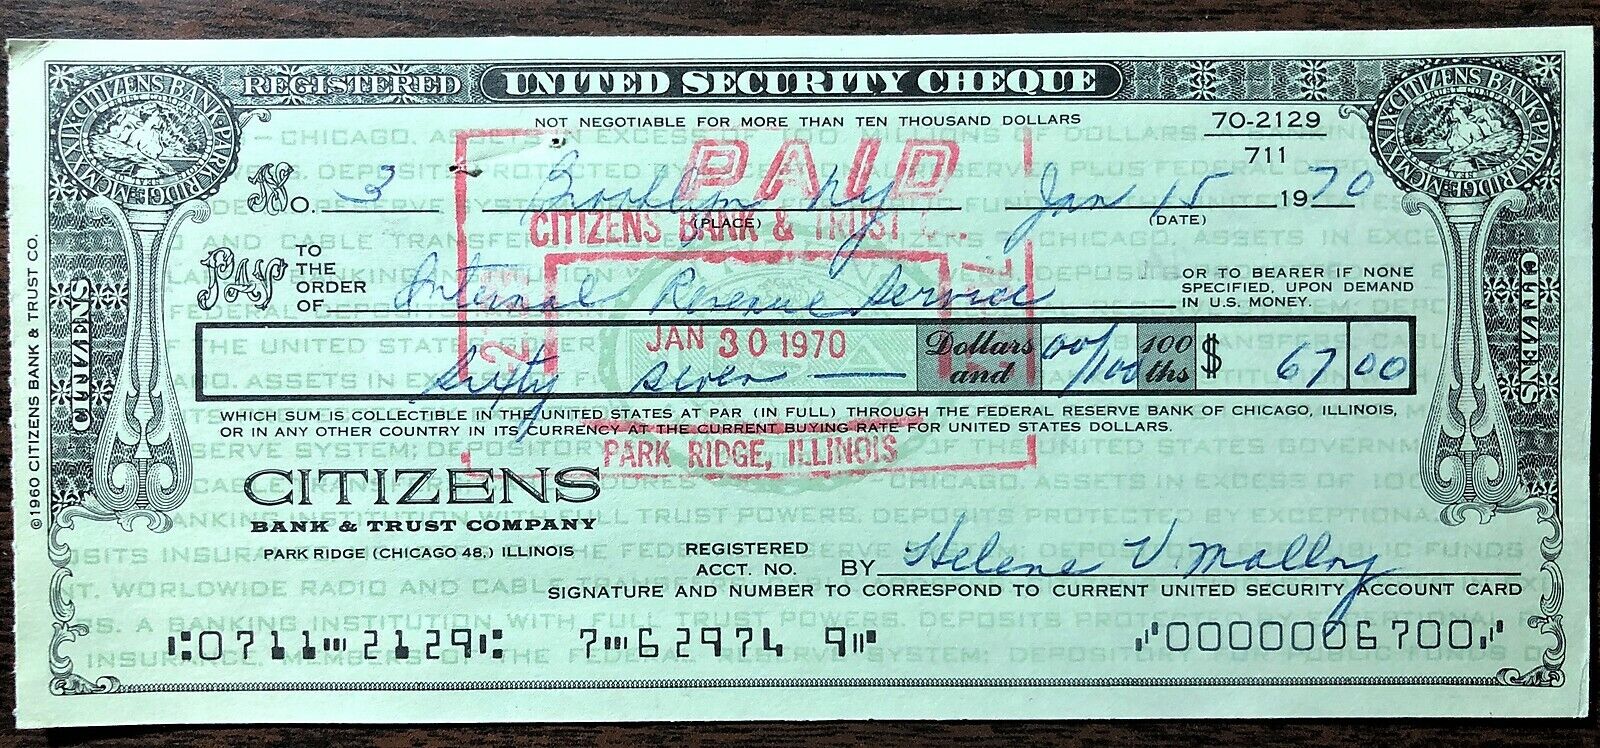 rare CITIZENS BANK & TRUST COMPANY -  CHICAGO ILL. - CANCELLED BANK CHECK (1970)